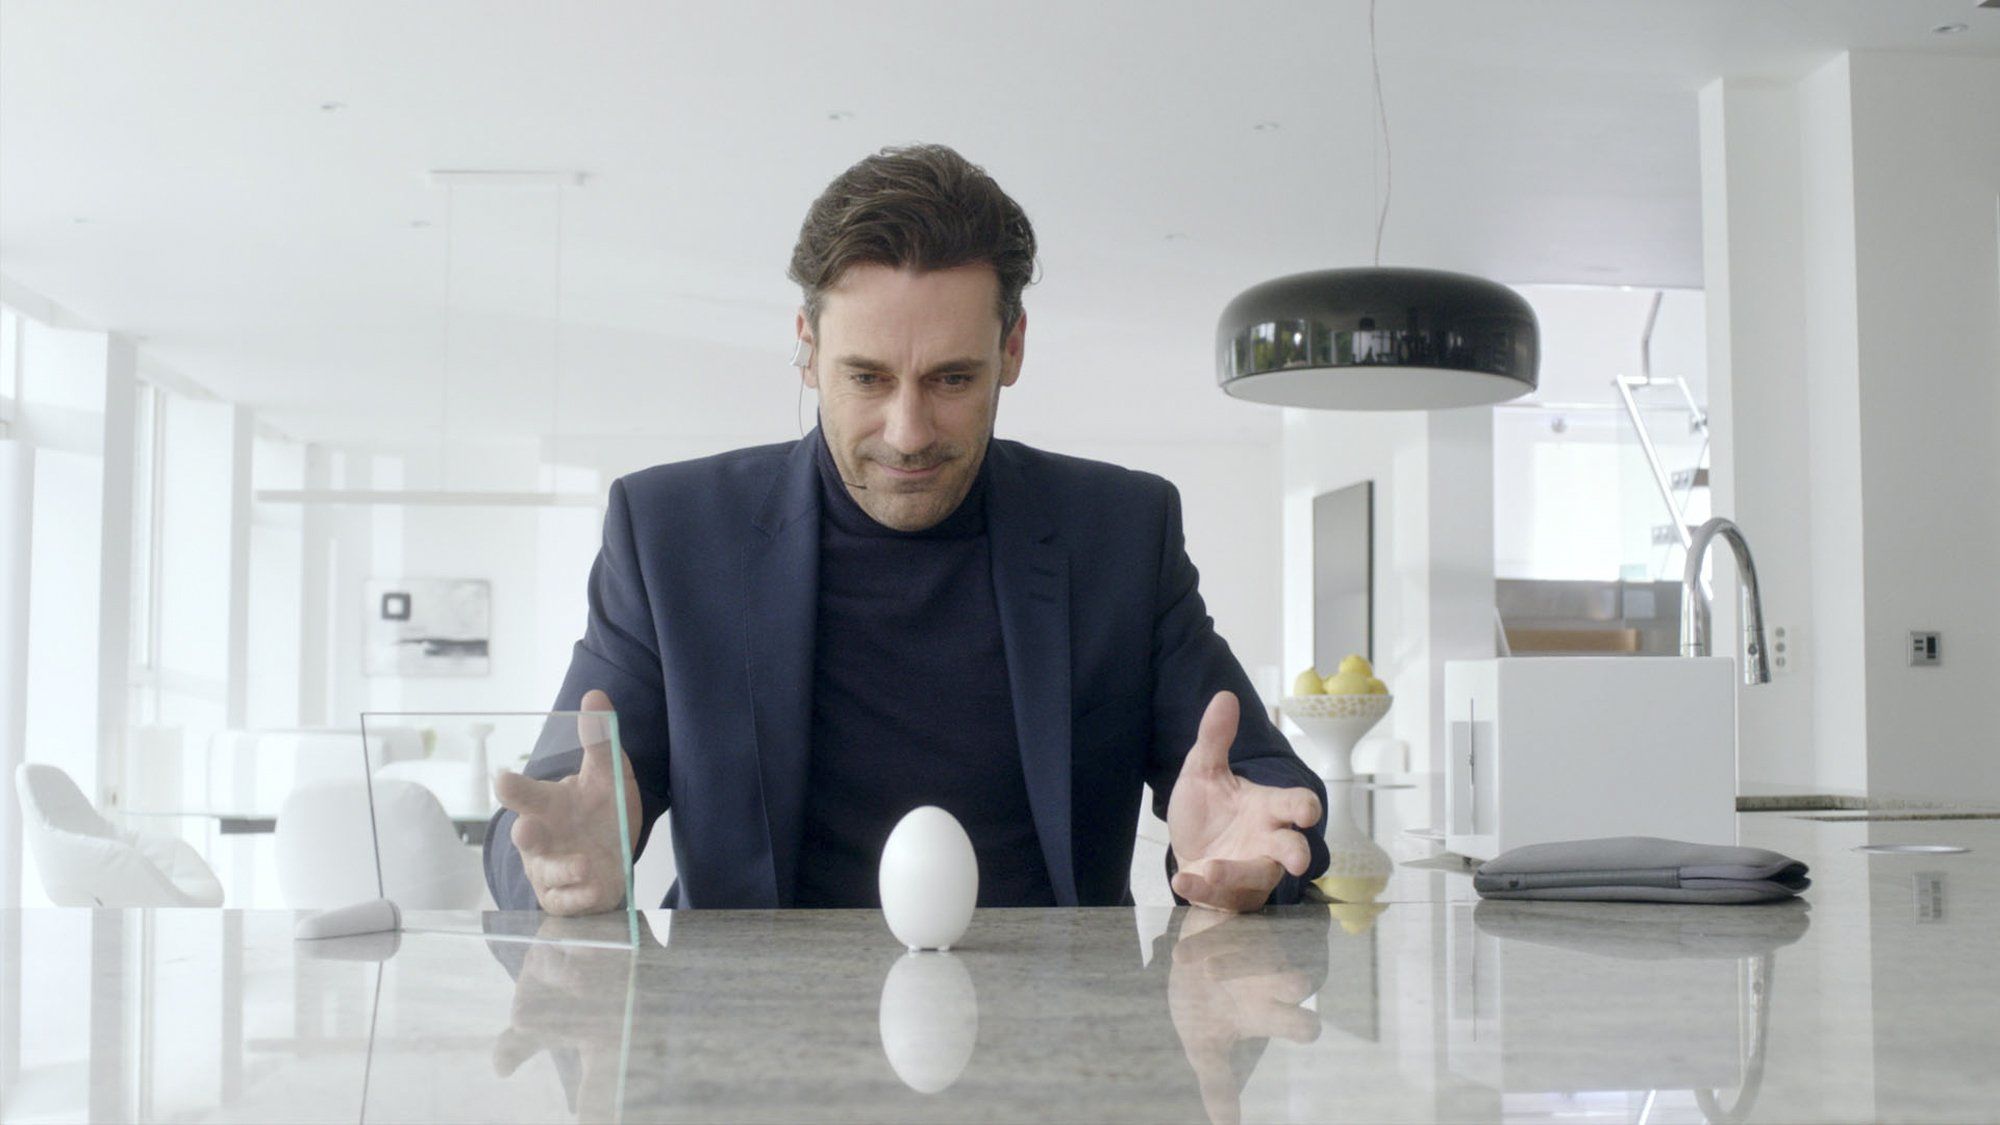 Man from Black Mirror's White Christmas episode, beholding an egg on a table